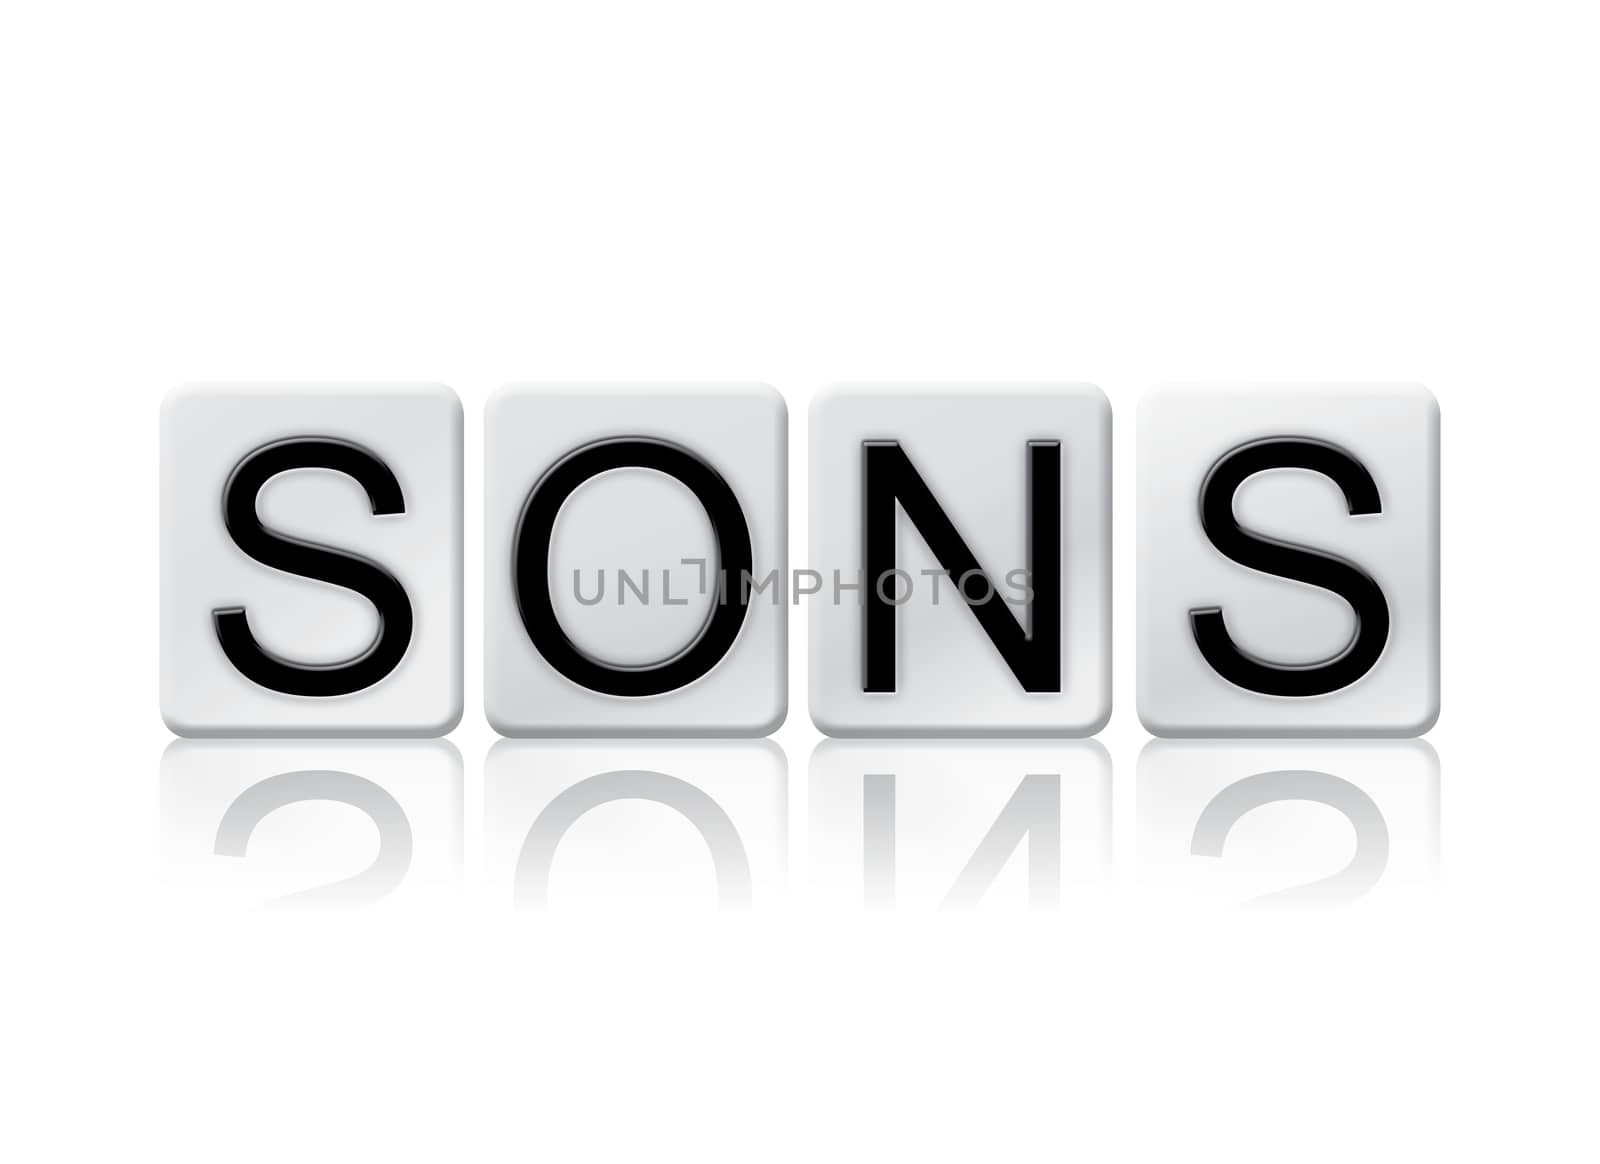 The word "Sons" written in tile letters isolated on a white background.